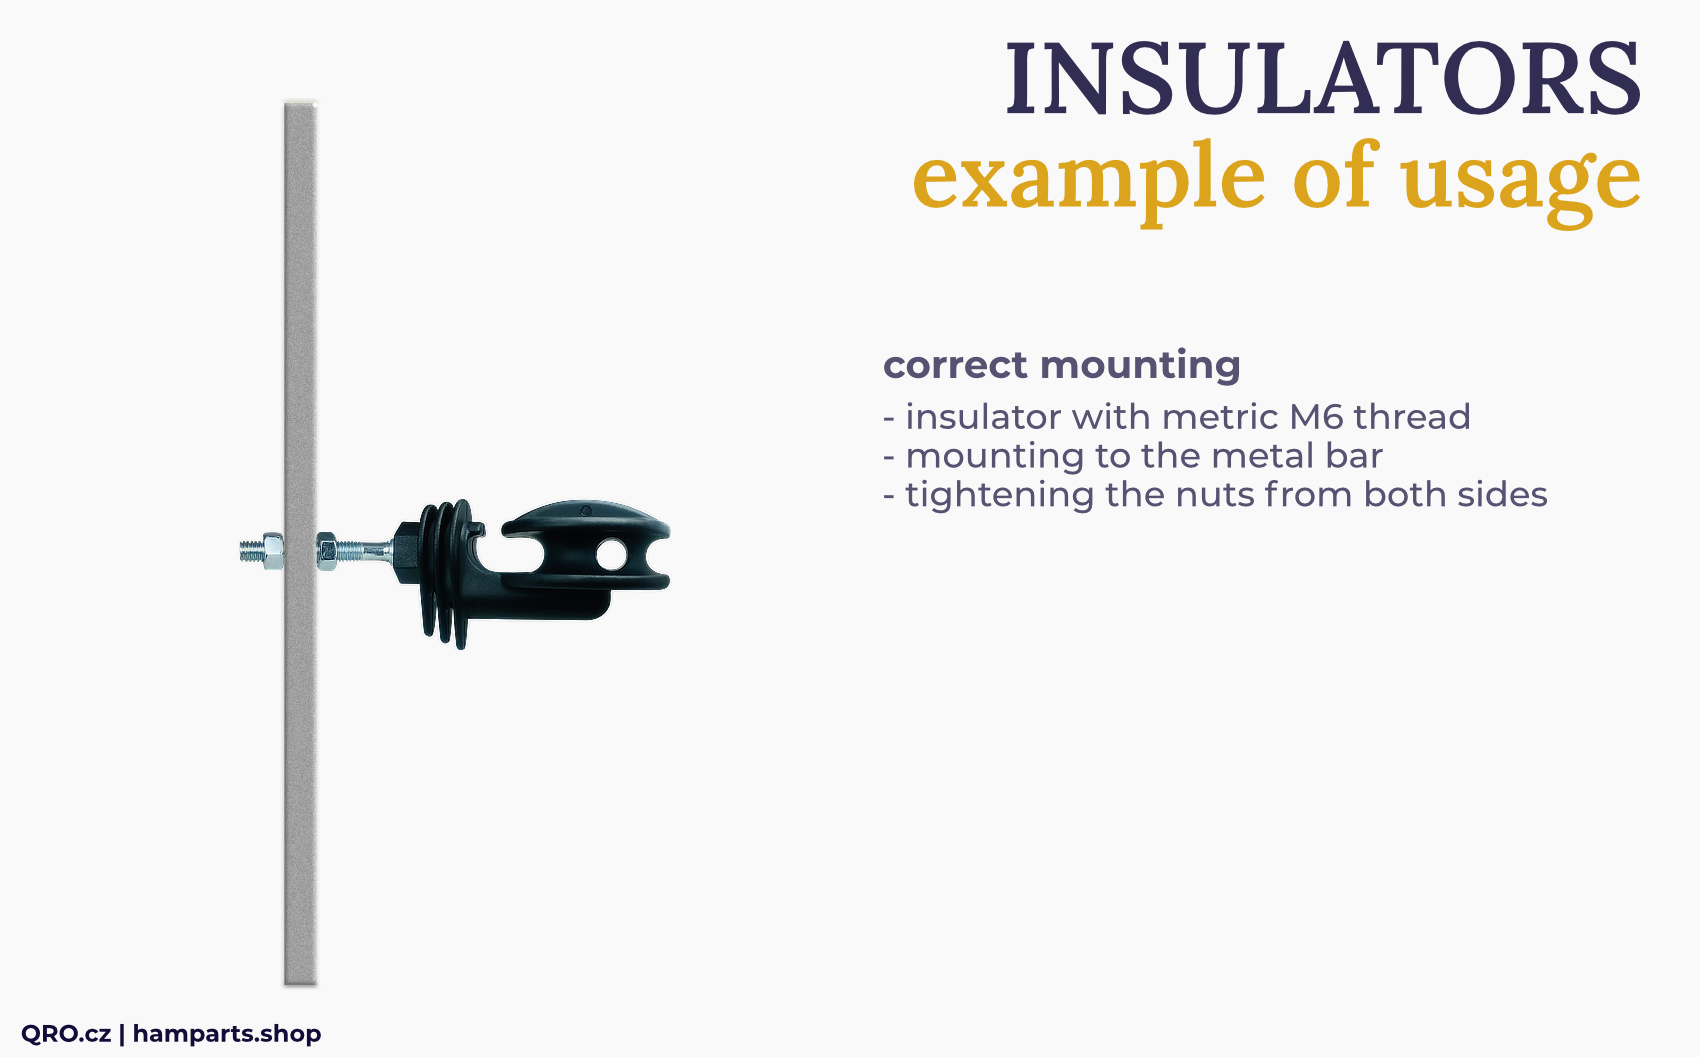 example of mounting the insulators by qro.cz hampart.shop